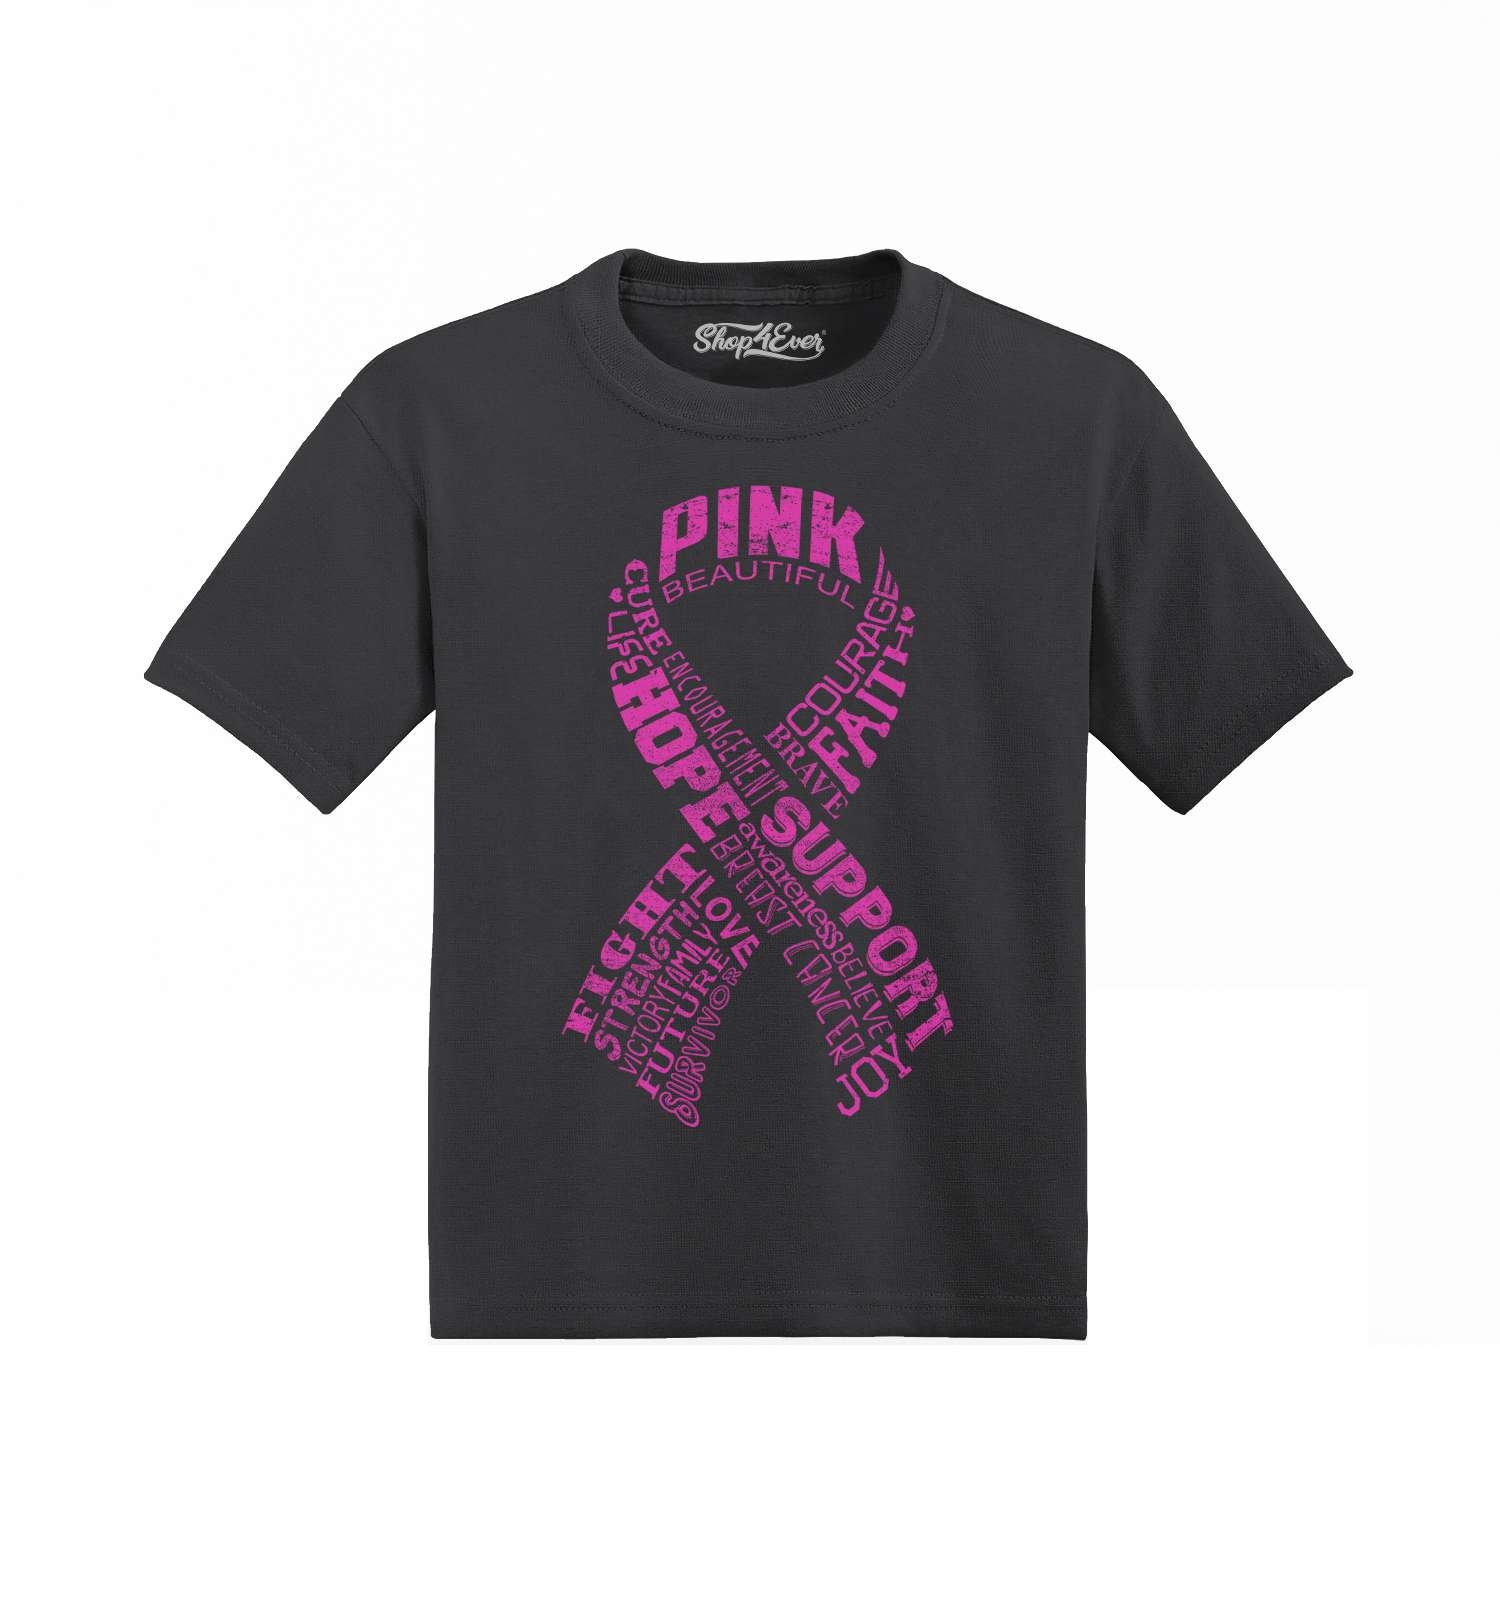 I Wear Pink For Someone Special Shirt Breast Cancer Awareness Shirts for Kids 